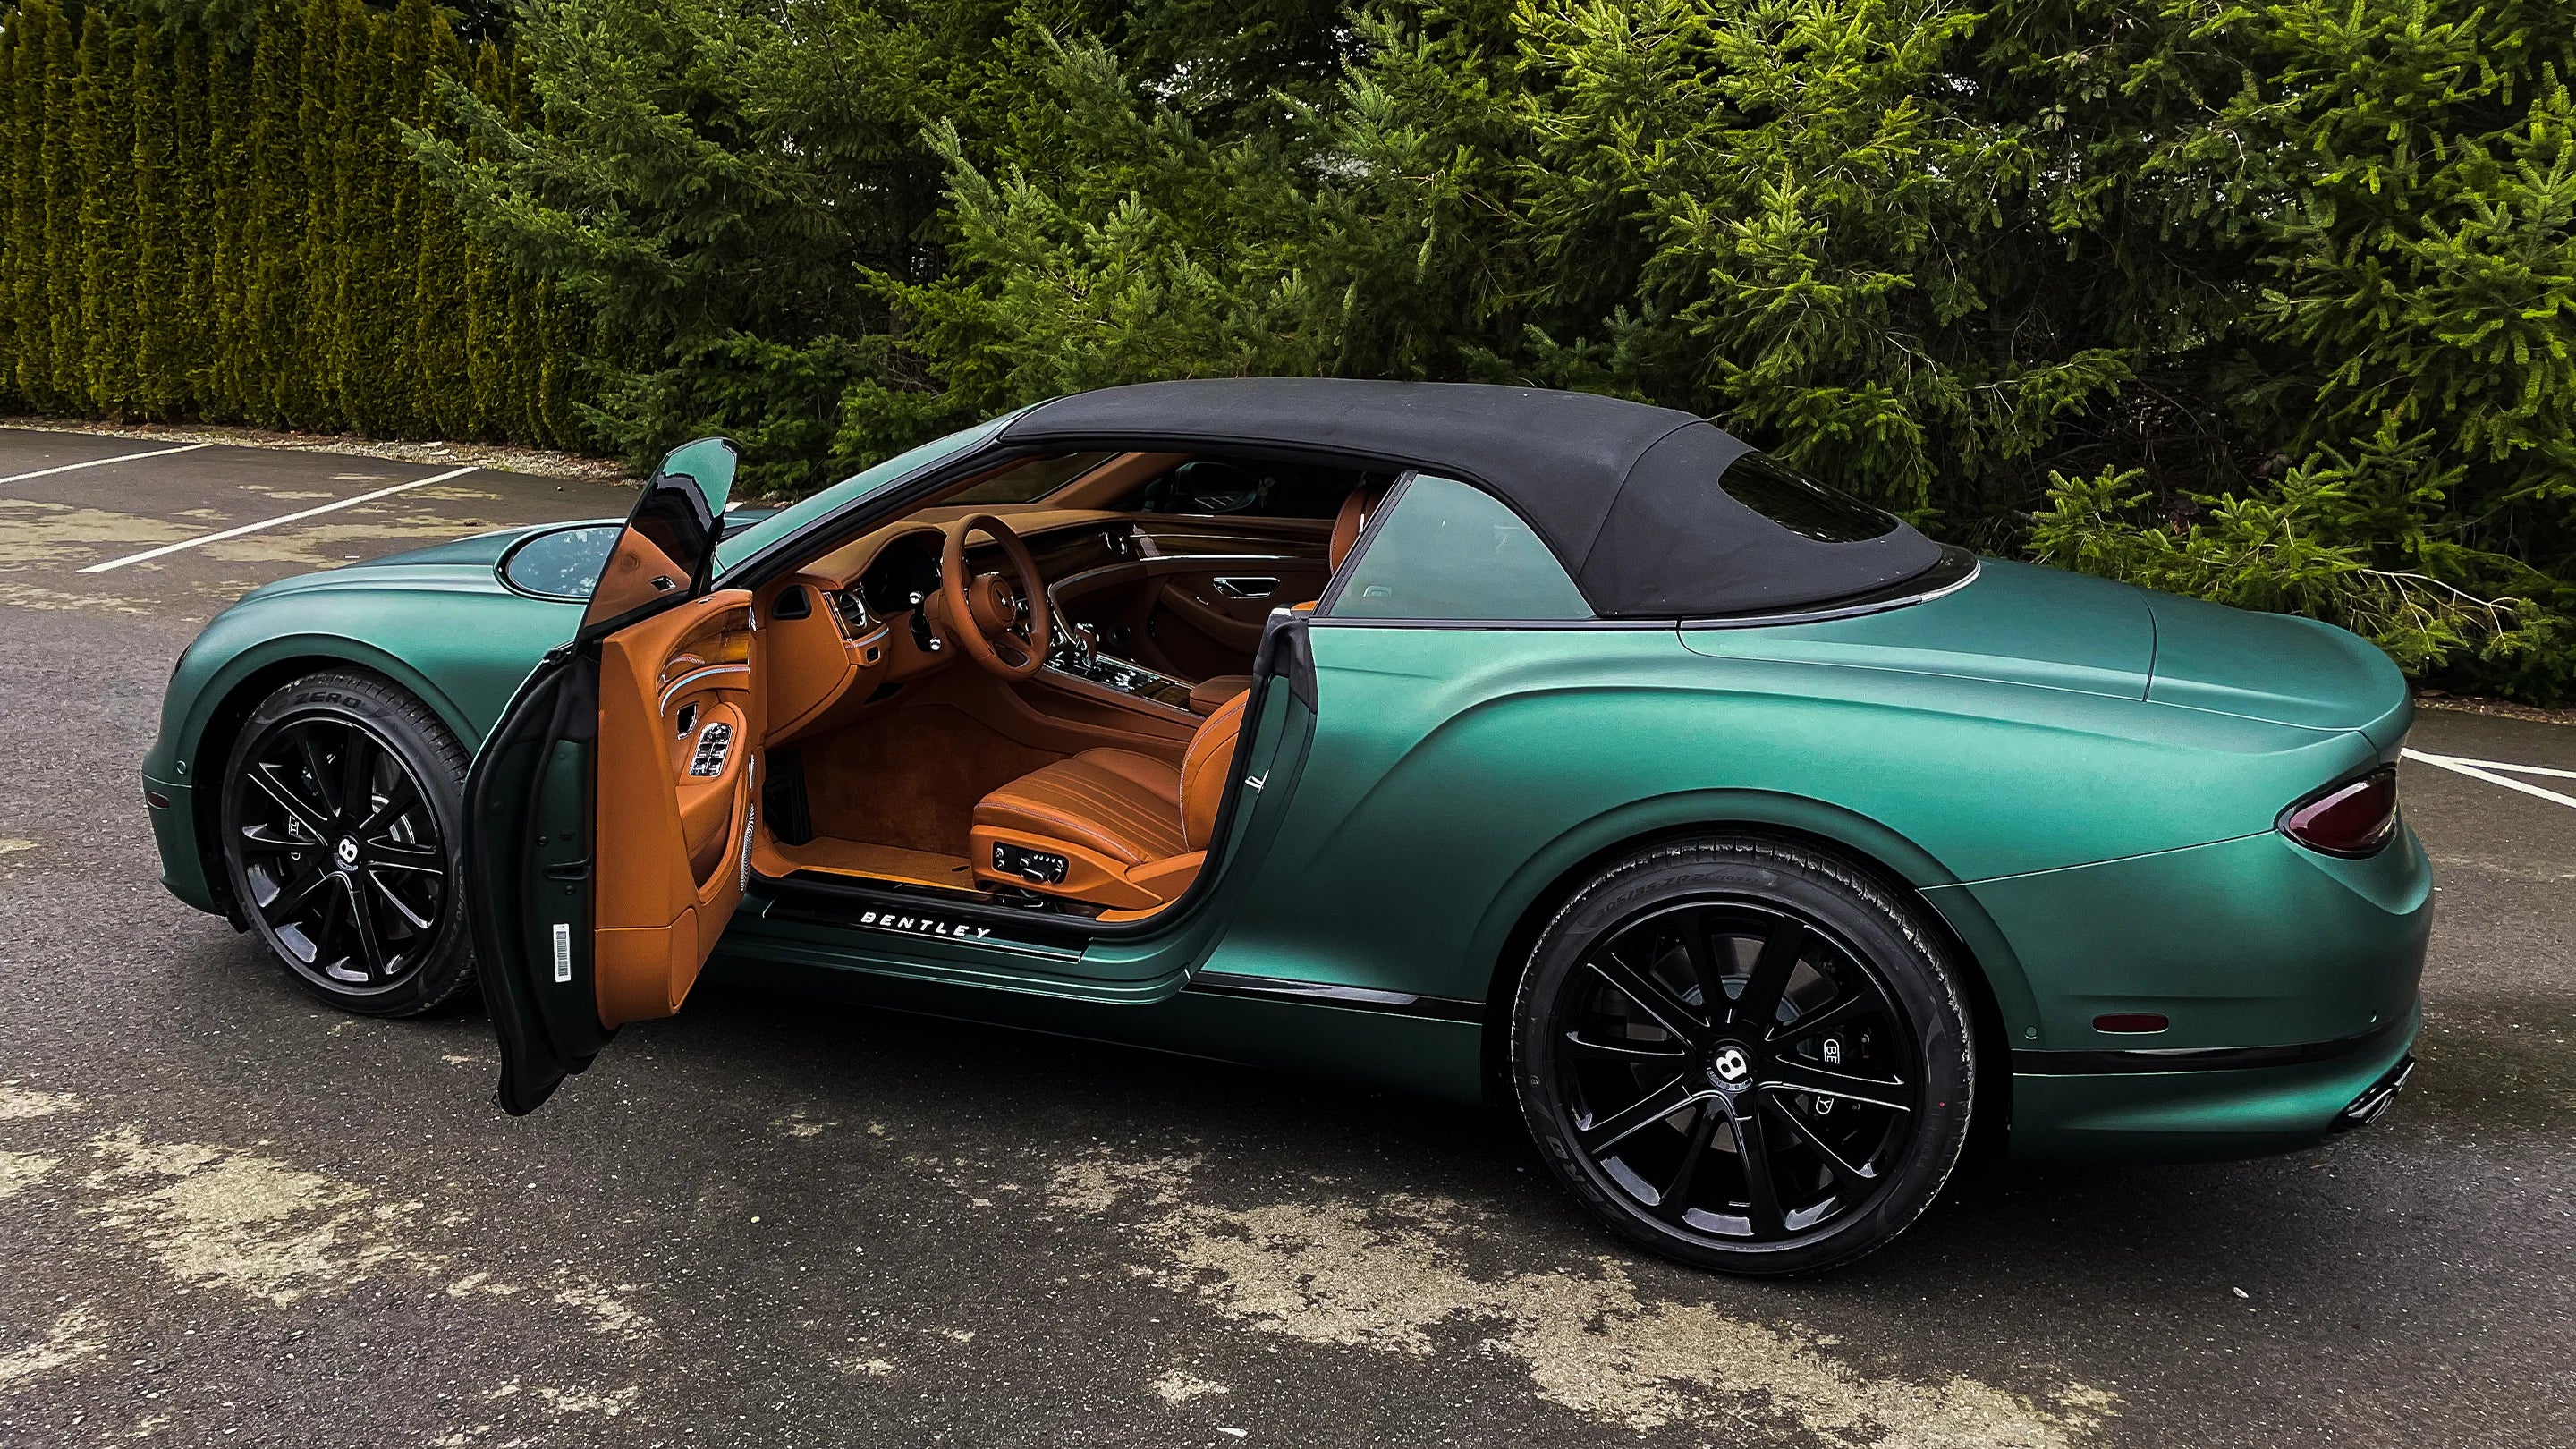 Full car wrap in 3M matte metallic pine green vinyl wrap we installed on this Bentley. We not only wrapped the entire body of the vehicle in car wrap film but also the door jams.